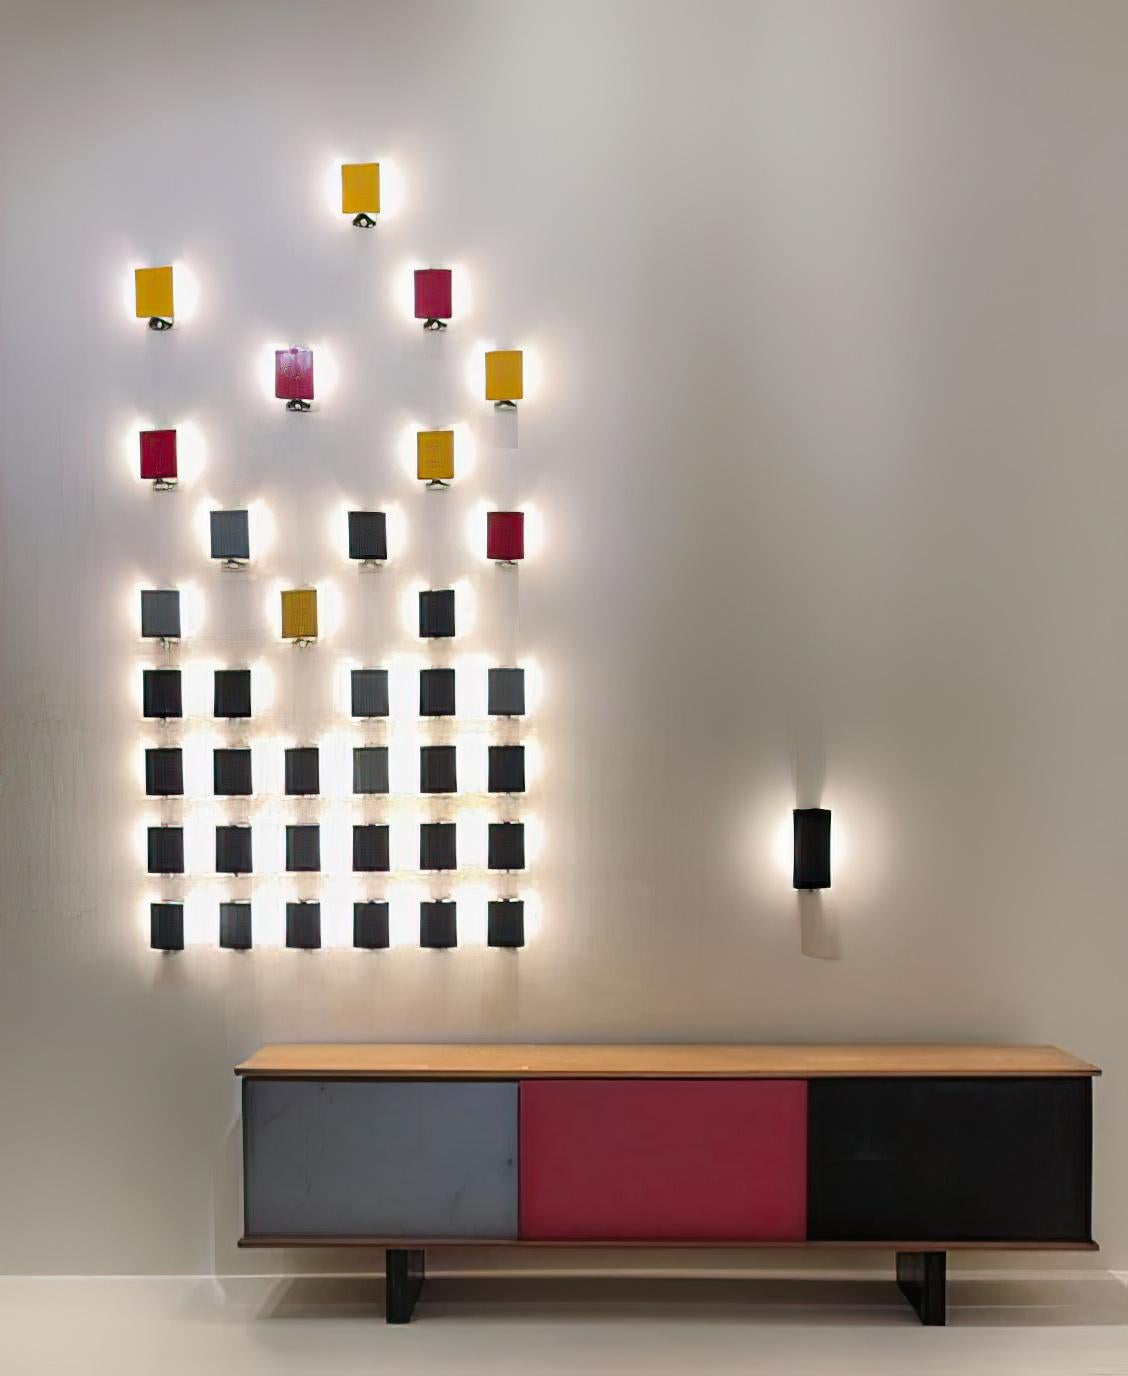 Set of 12 Charlotte Perriand 'CP1' wall lights. A clean and iconic design executed in red (RAL 3002), black, blue (RAL 5002) and white painted metal. 

Price is for the set. Two sets available. 

In-stock lead time up to 2-3 weeks. Out of stock lead